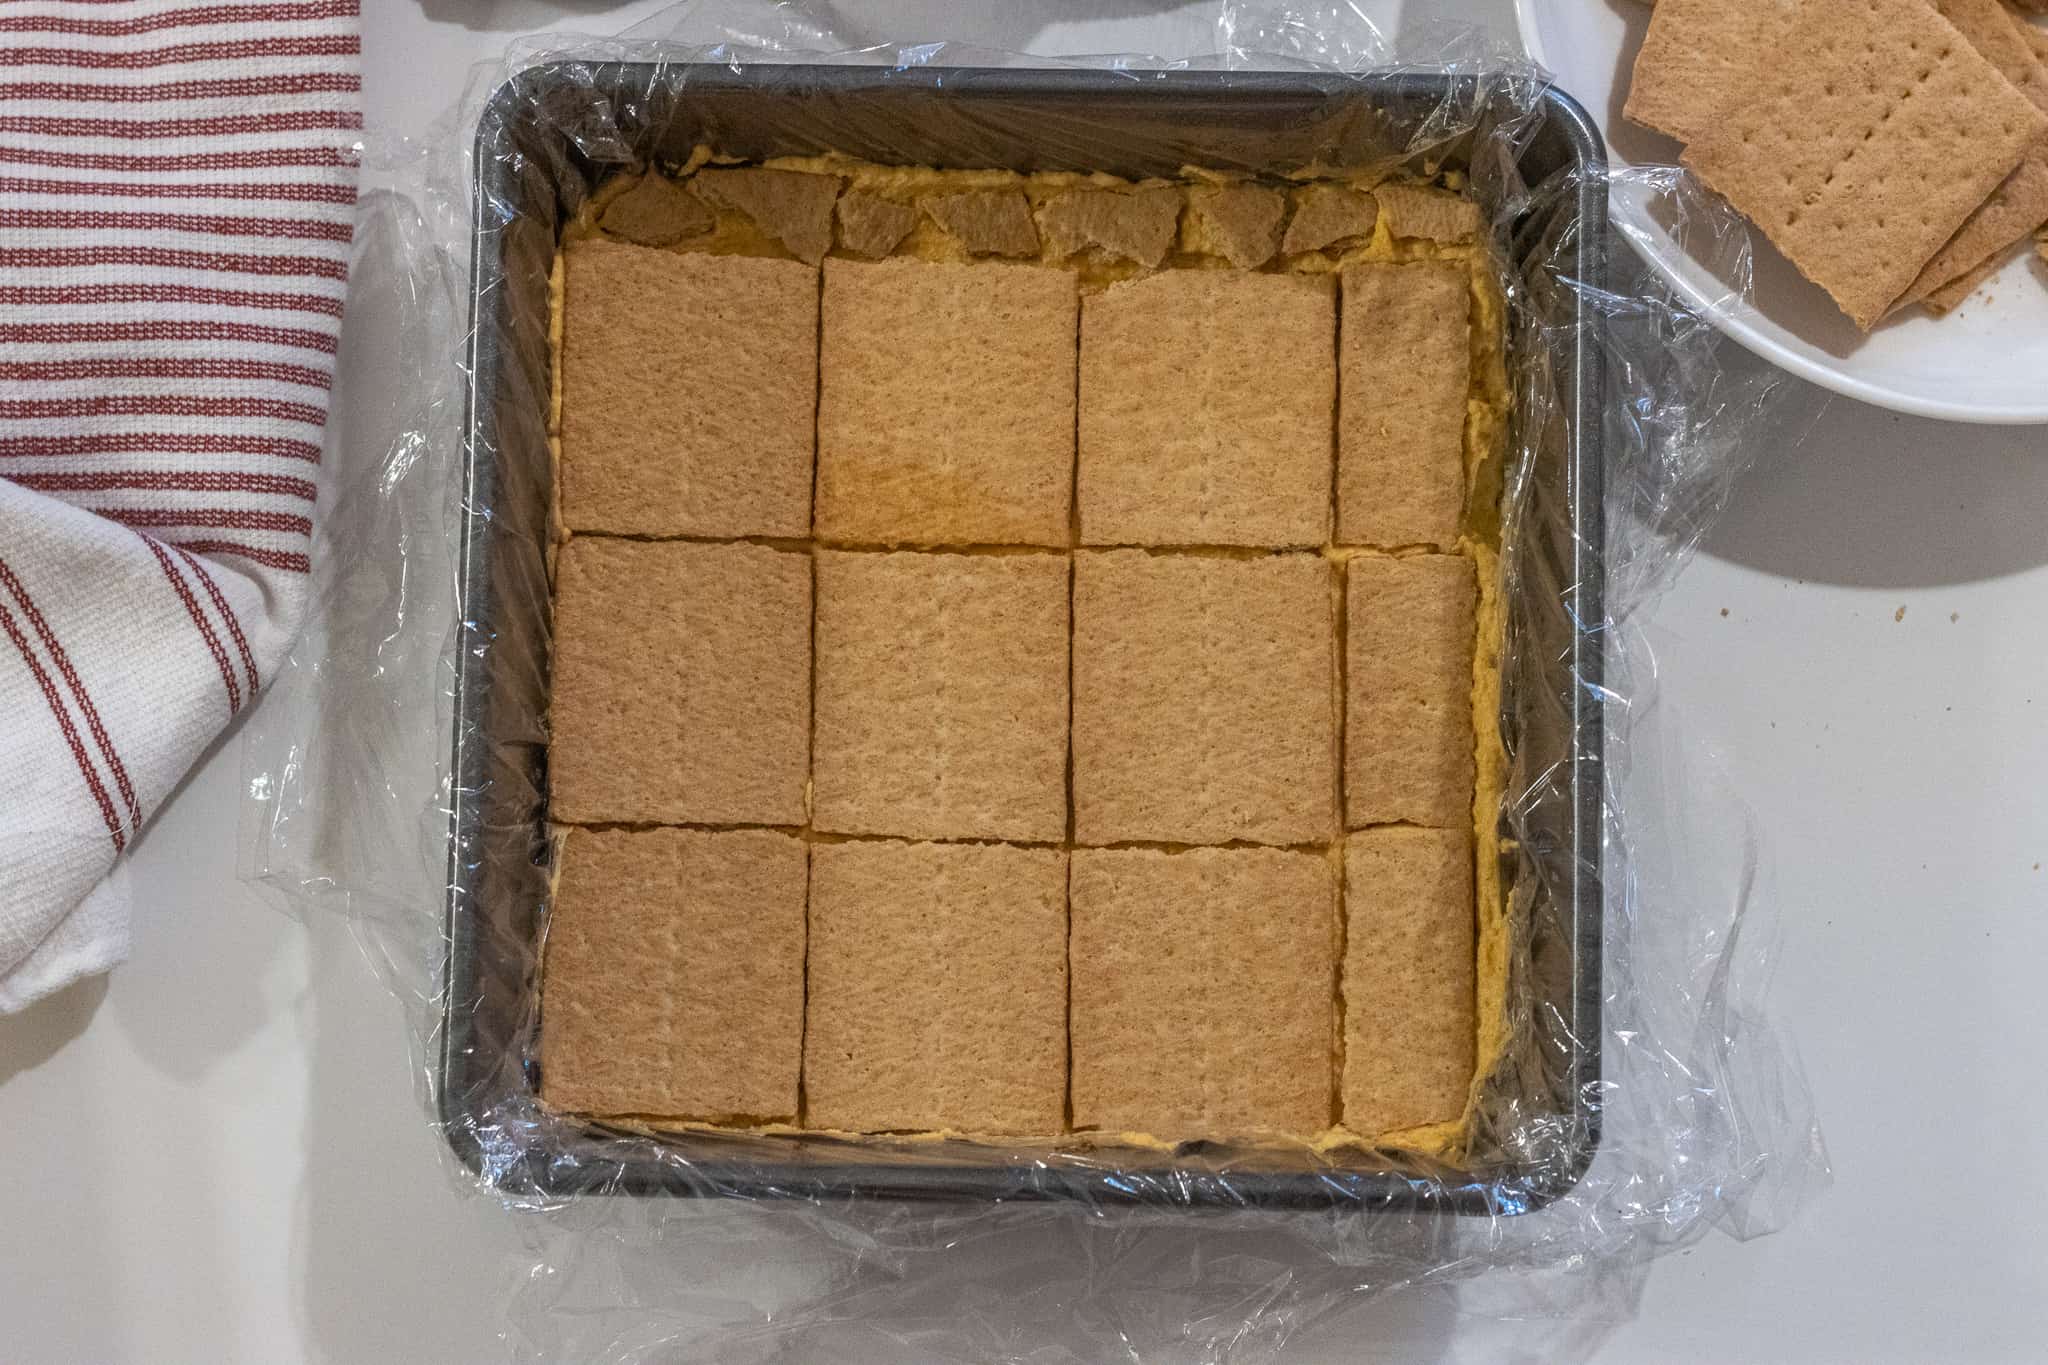 Plastic lined baking dish with a layer of graham crackers.